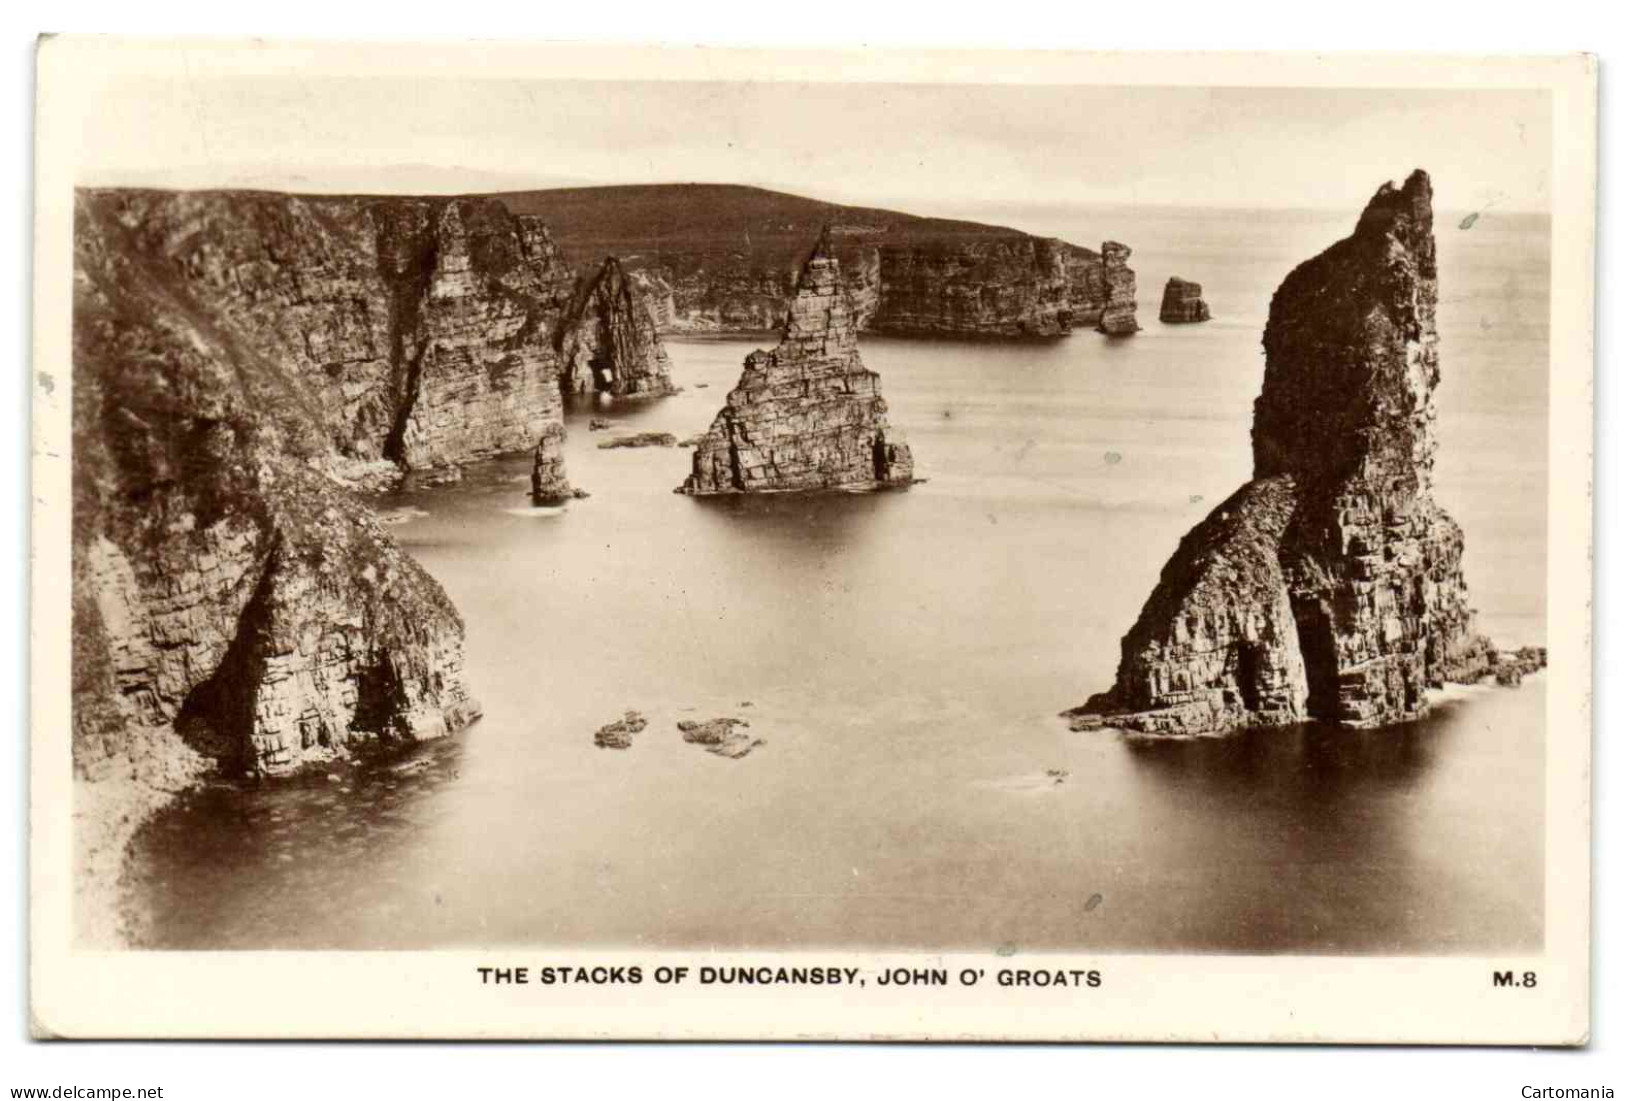 The Stack Of Duncansby - John O'Groats - Caithness